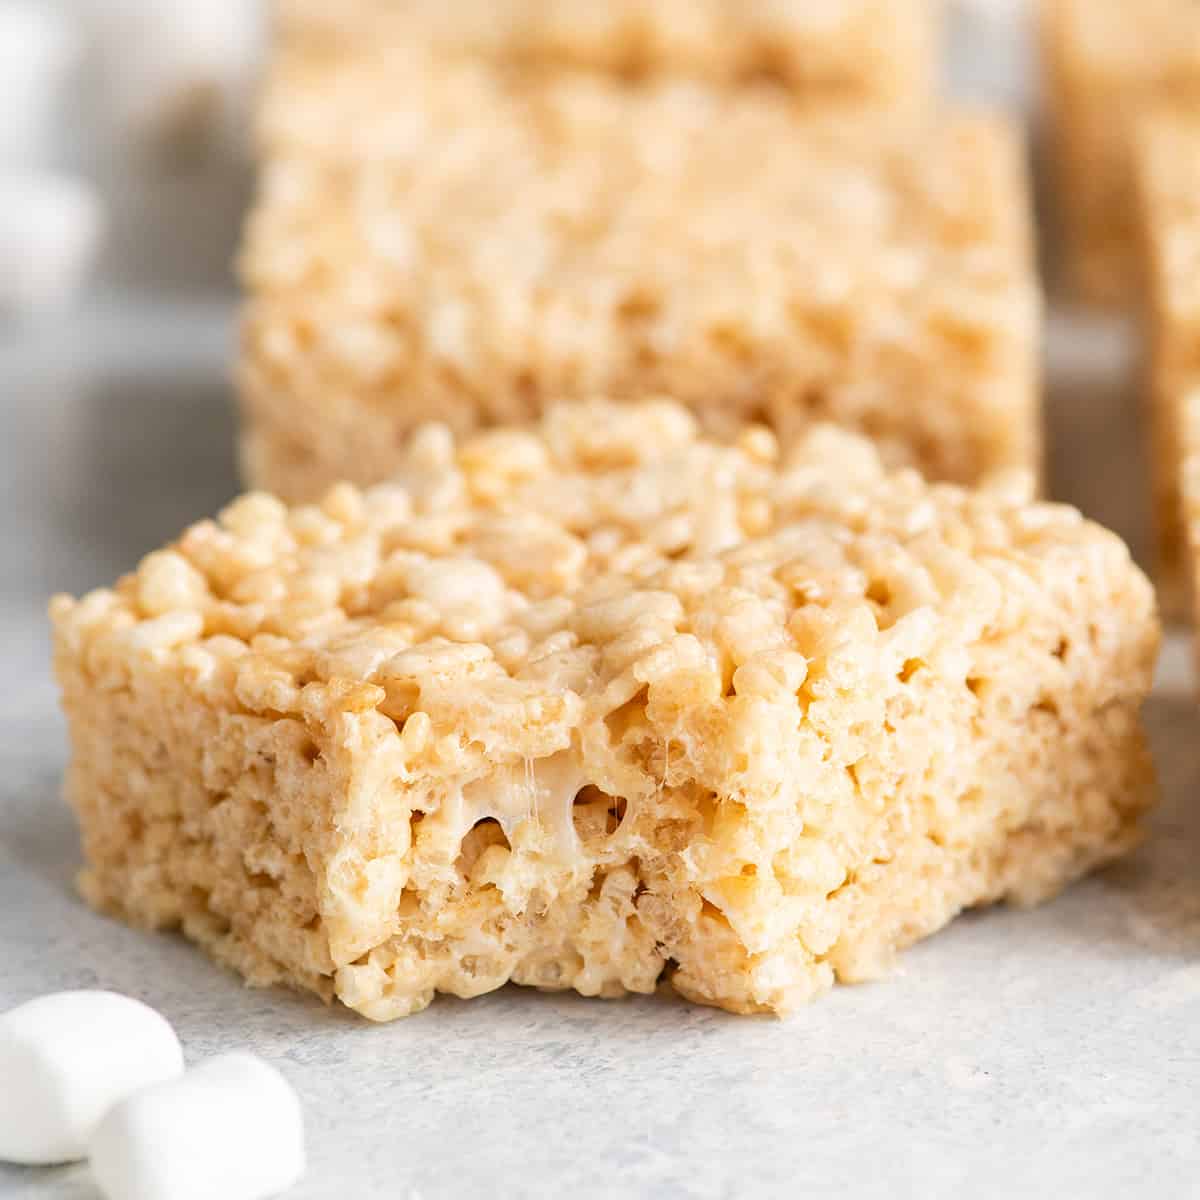 up close photo of a rice crispy treat with a bite taken out of it